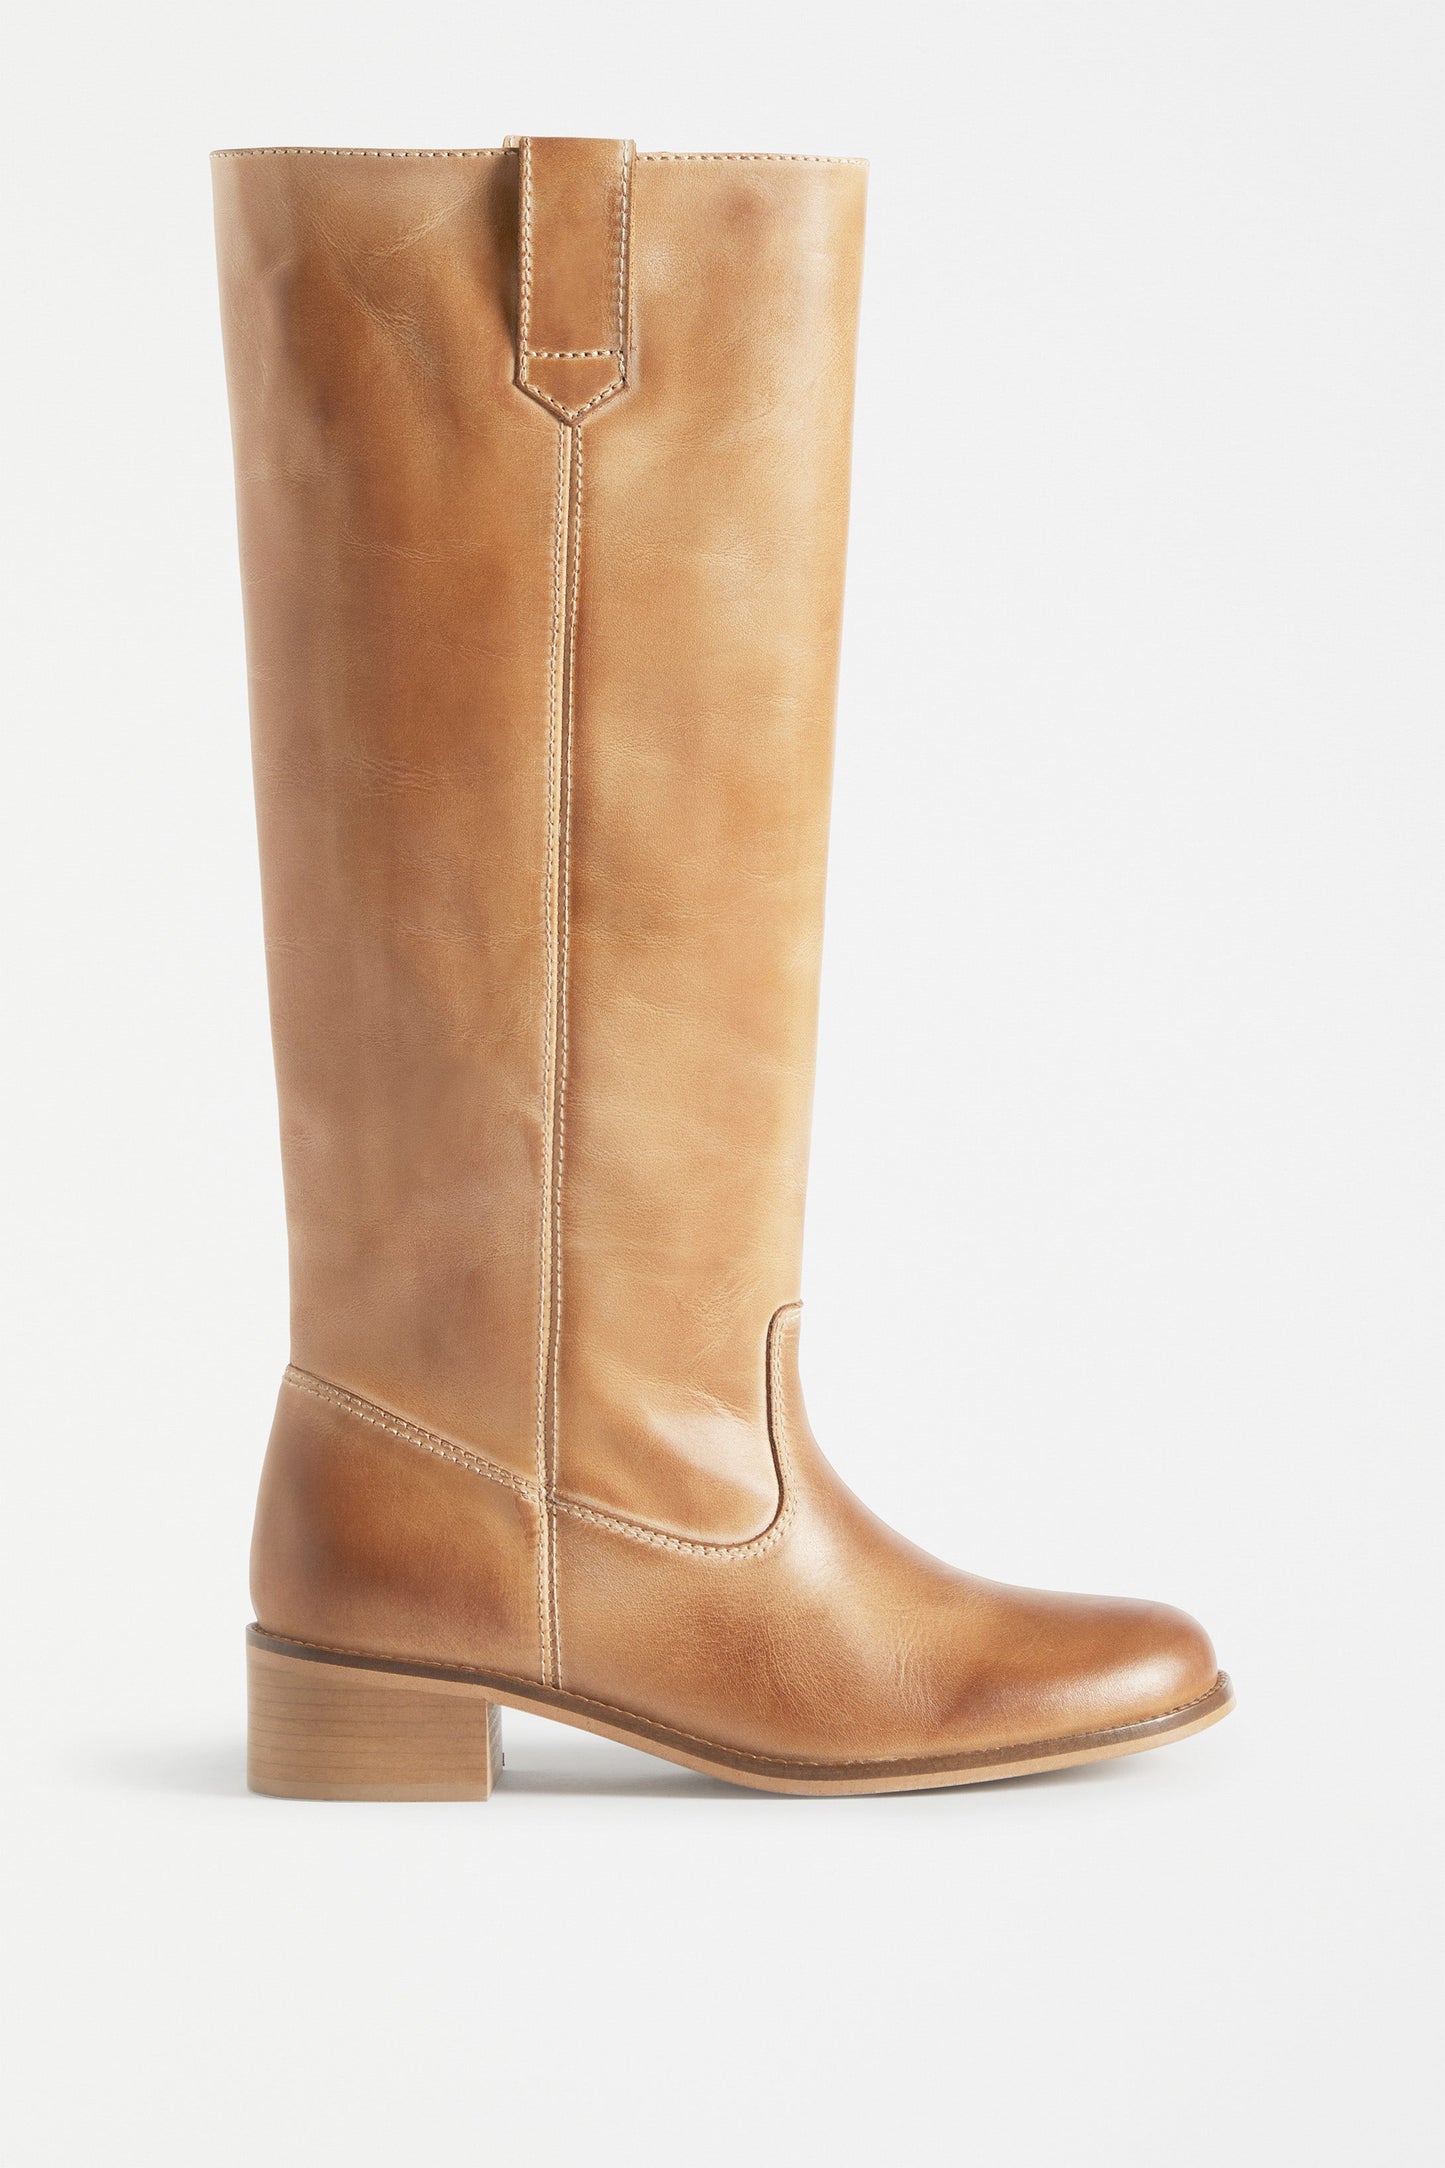 Anna Escovado Natural Worn Look Knee High Leather Boots Side | TAN